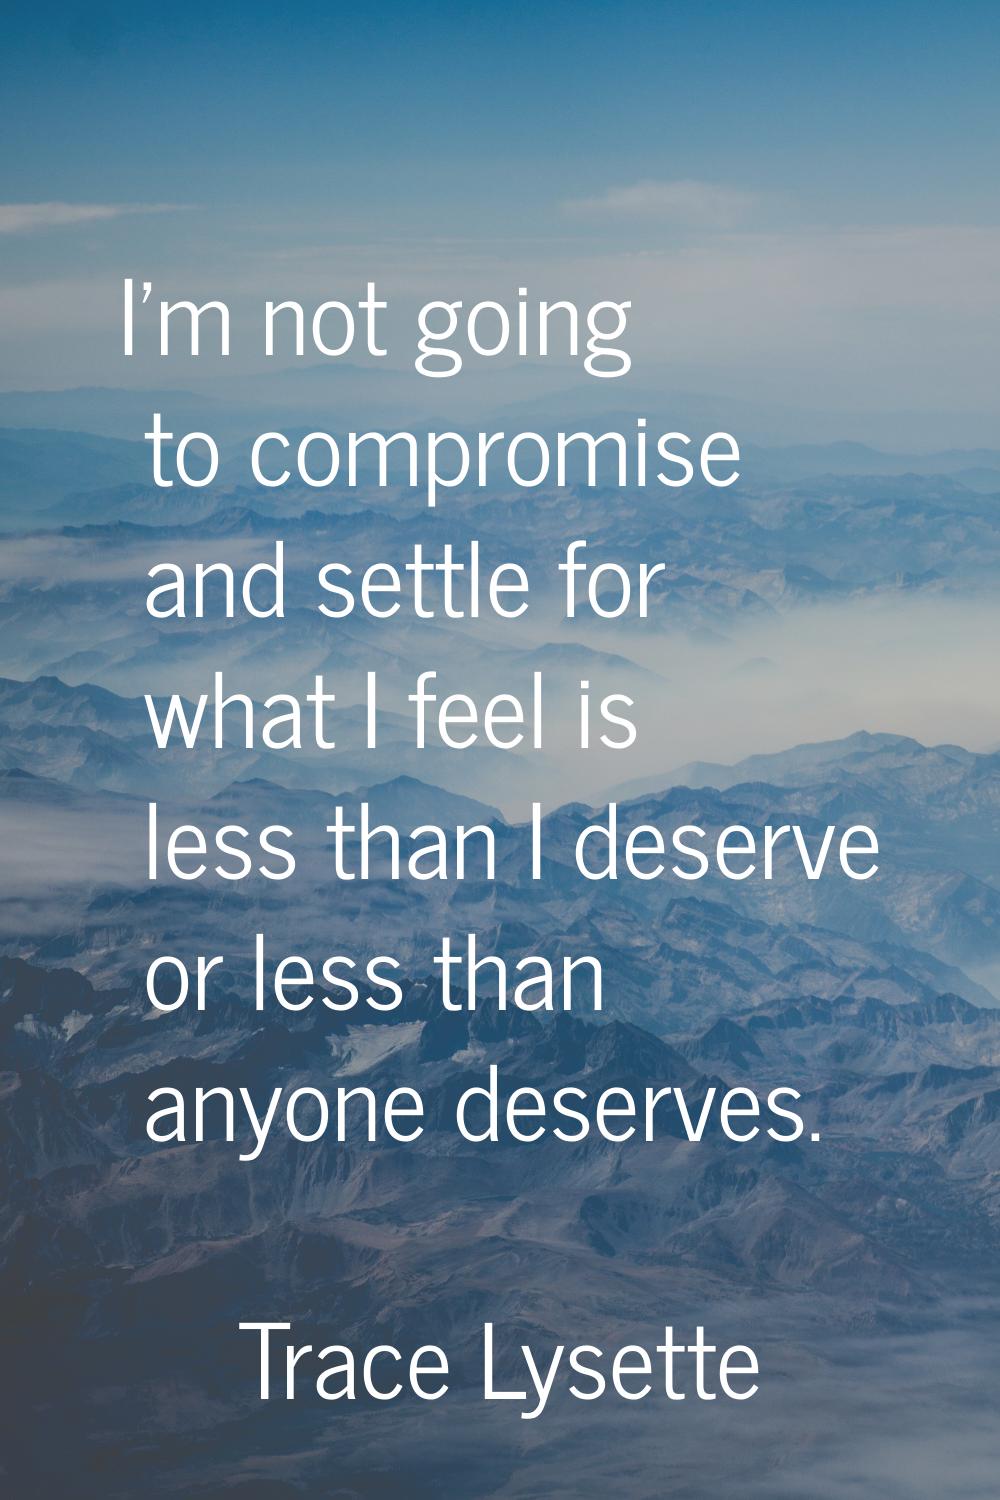 I'm not going to compromise and settle for what I feel is less than I deserve or less than anyone d